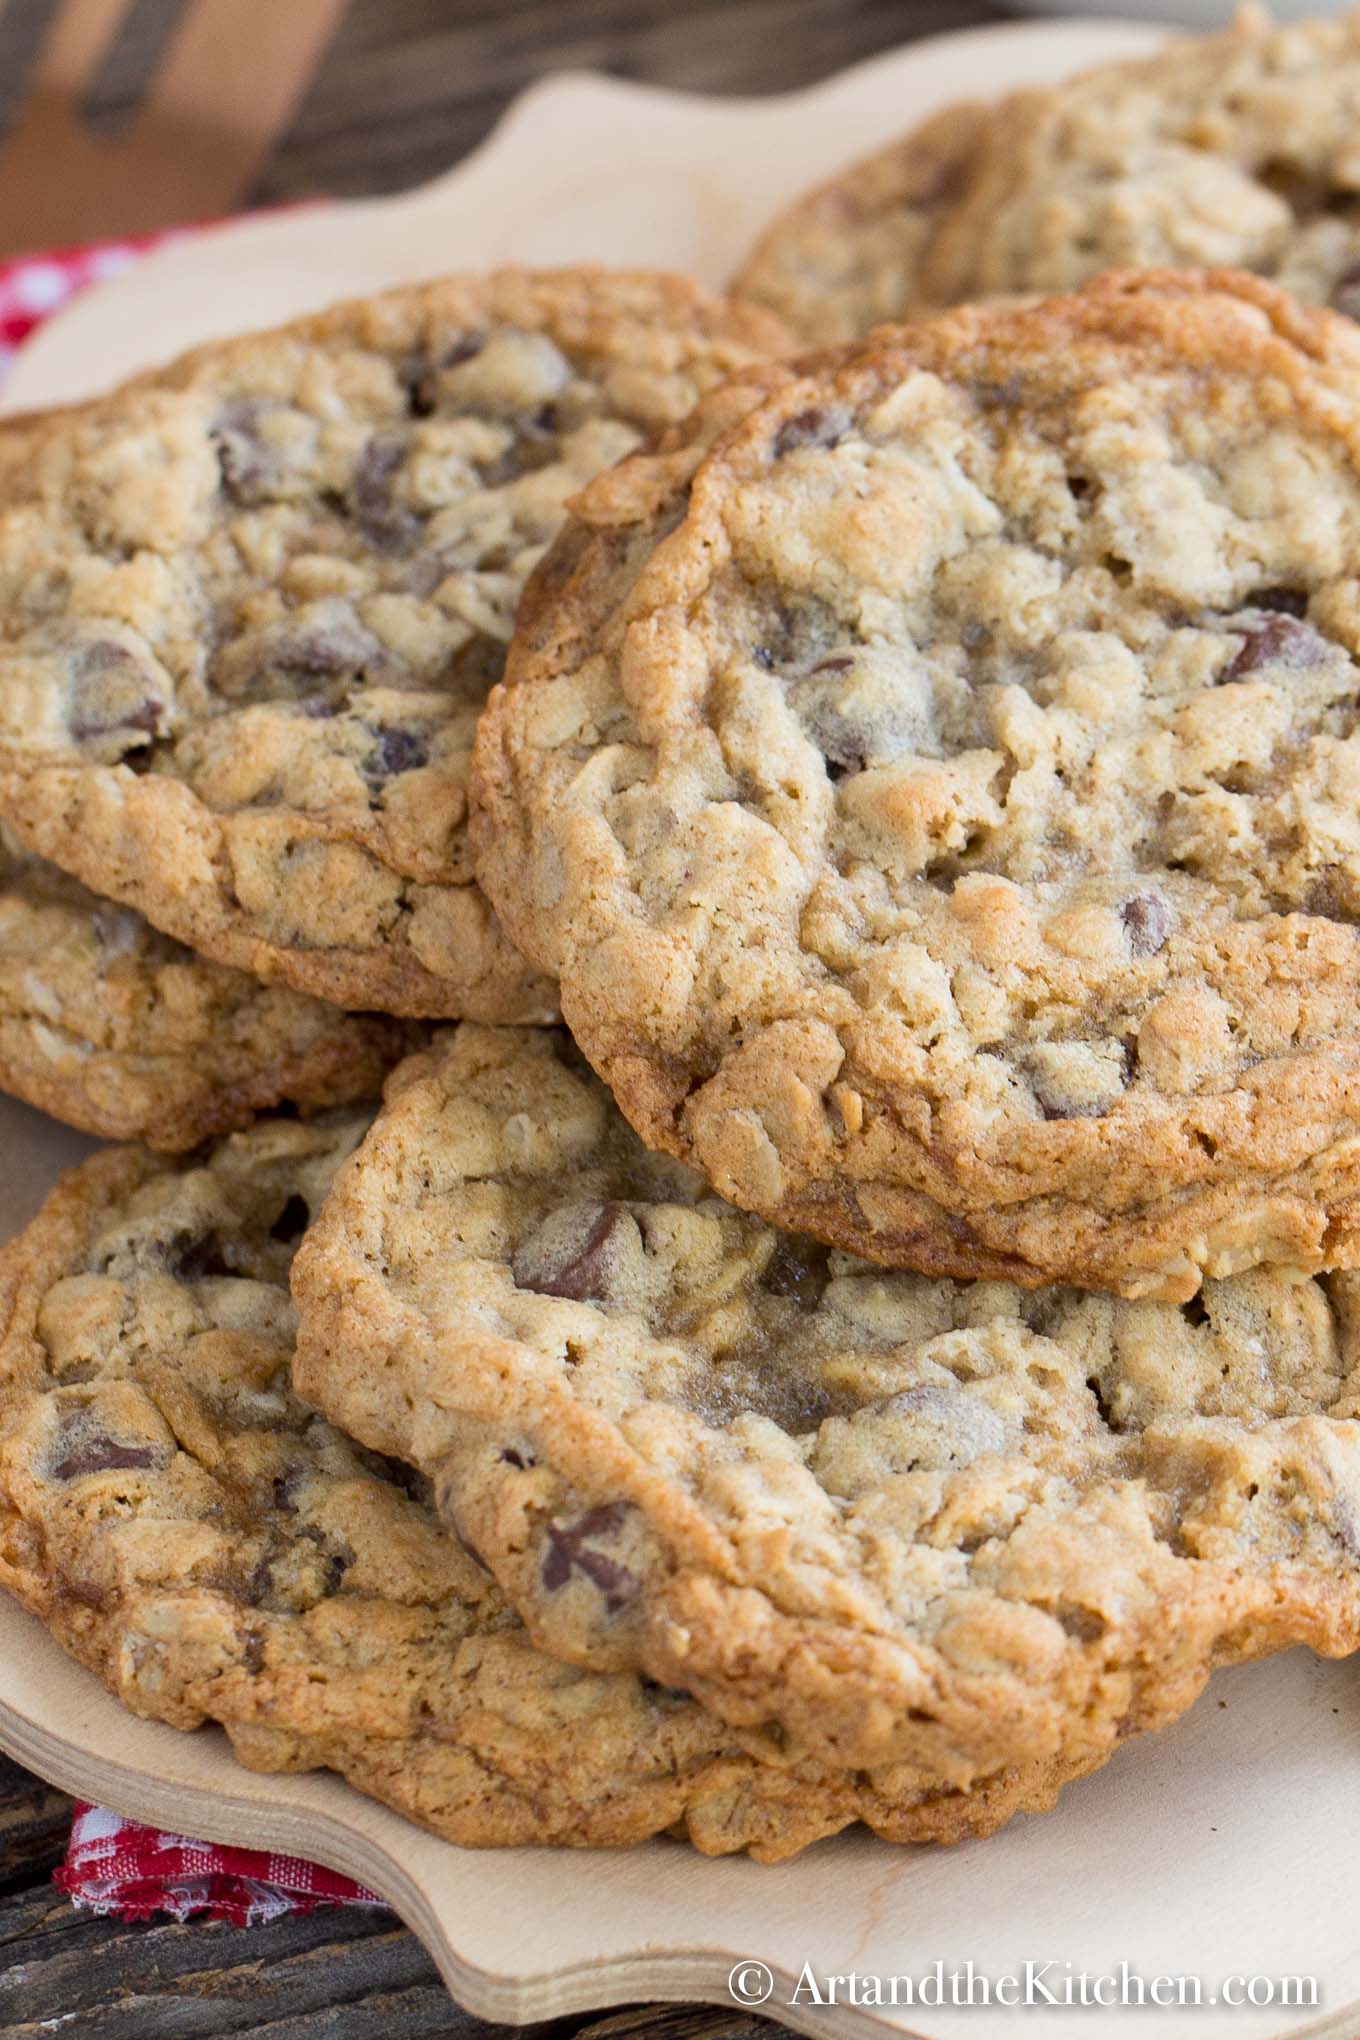 Wooden plate filled with homemade chocolate chip cookies